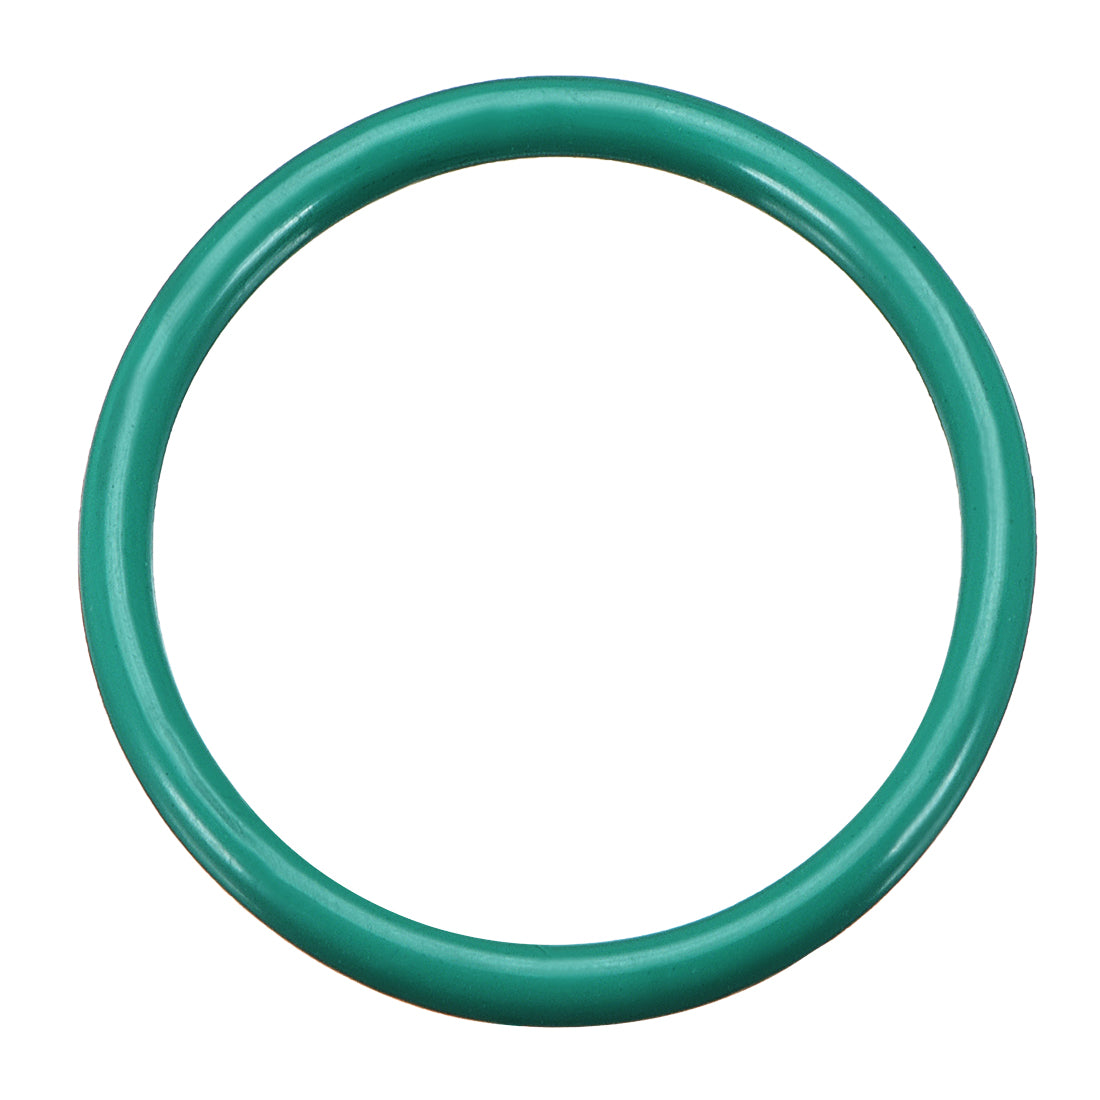 uxcell Uxcell O-Rings Fluorine Rubber 28mm x 33.3mm x 2.65mm Seal Rings Sealing Gasket